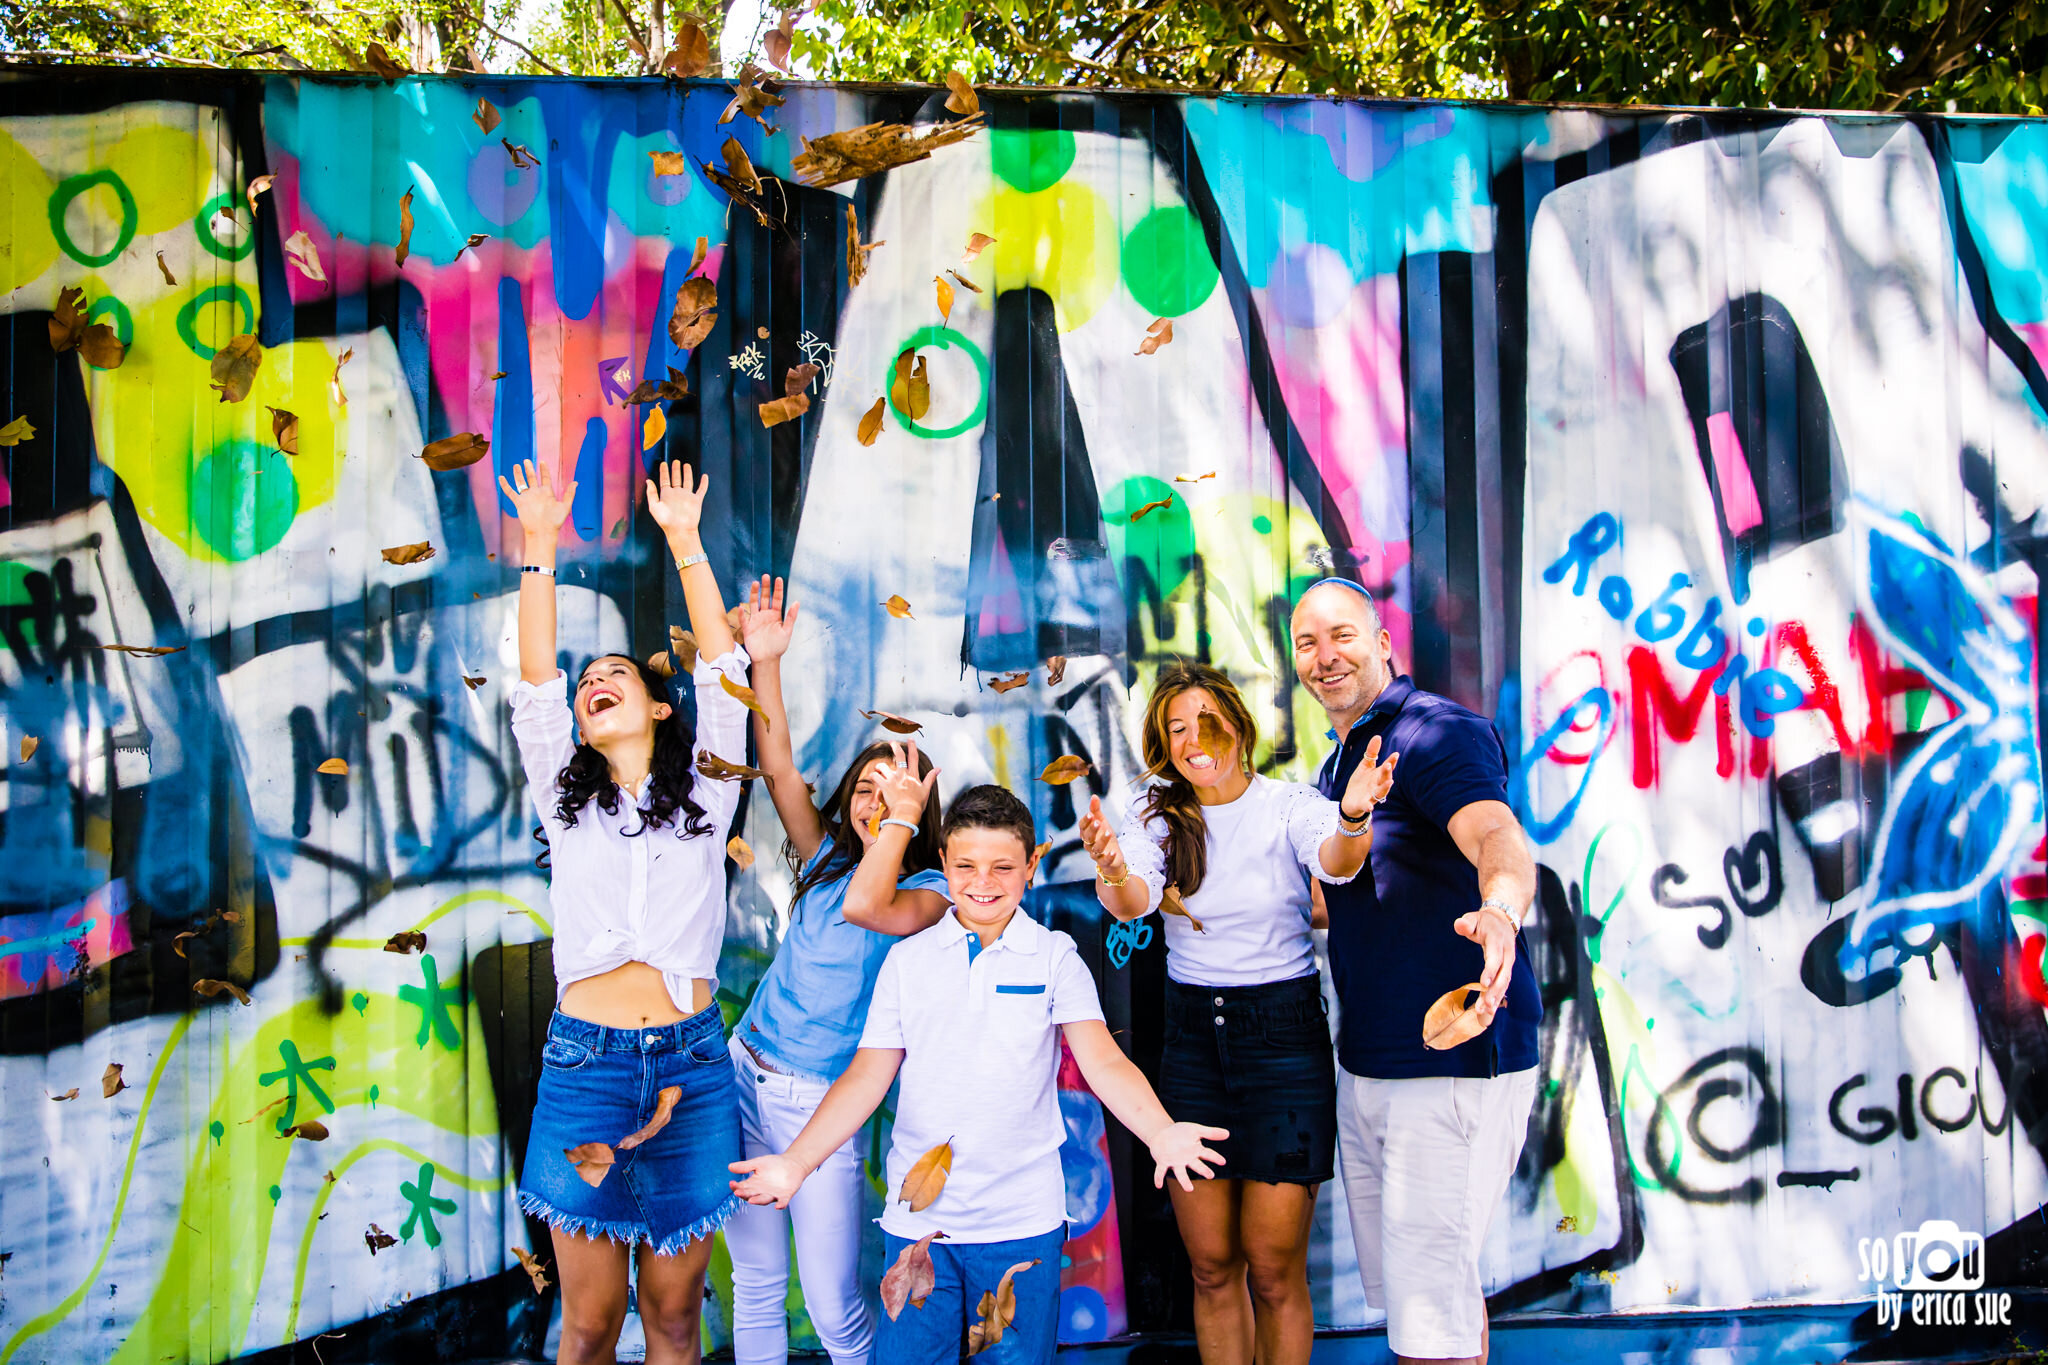 19-so-you-by-erica-sue-extended-family-session-wynwood-lifestyle-photographer-CD8A7772.jpg